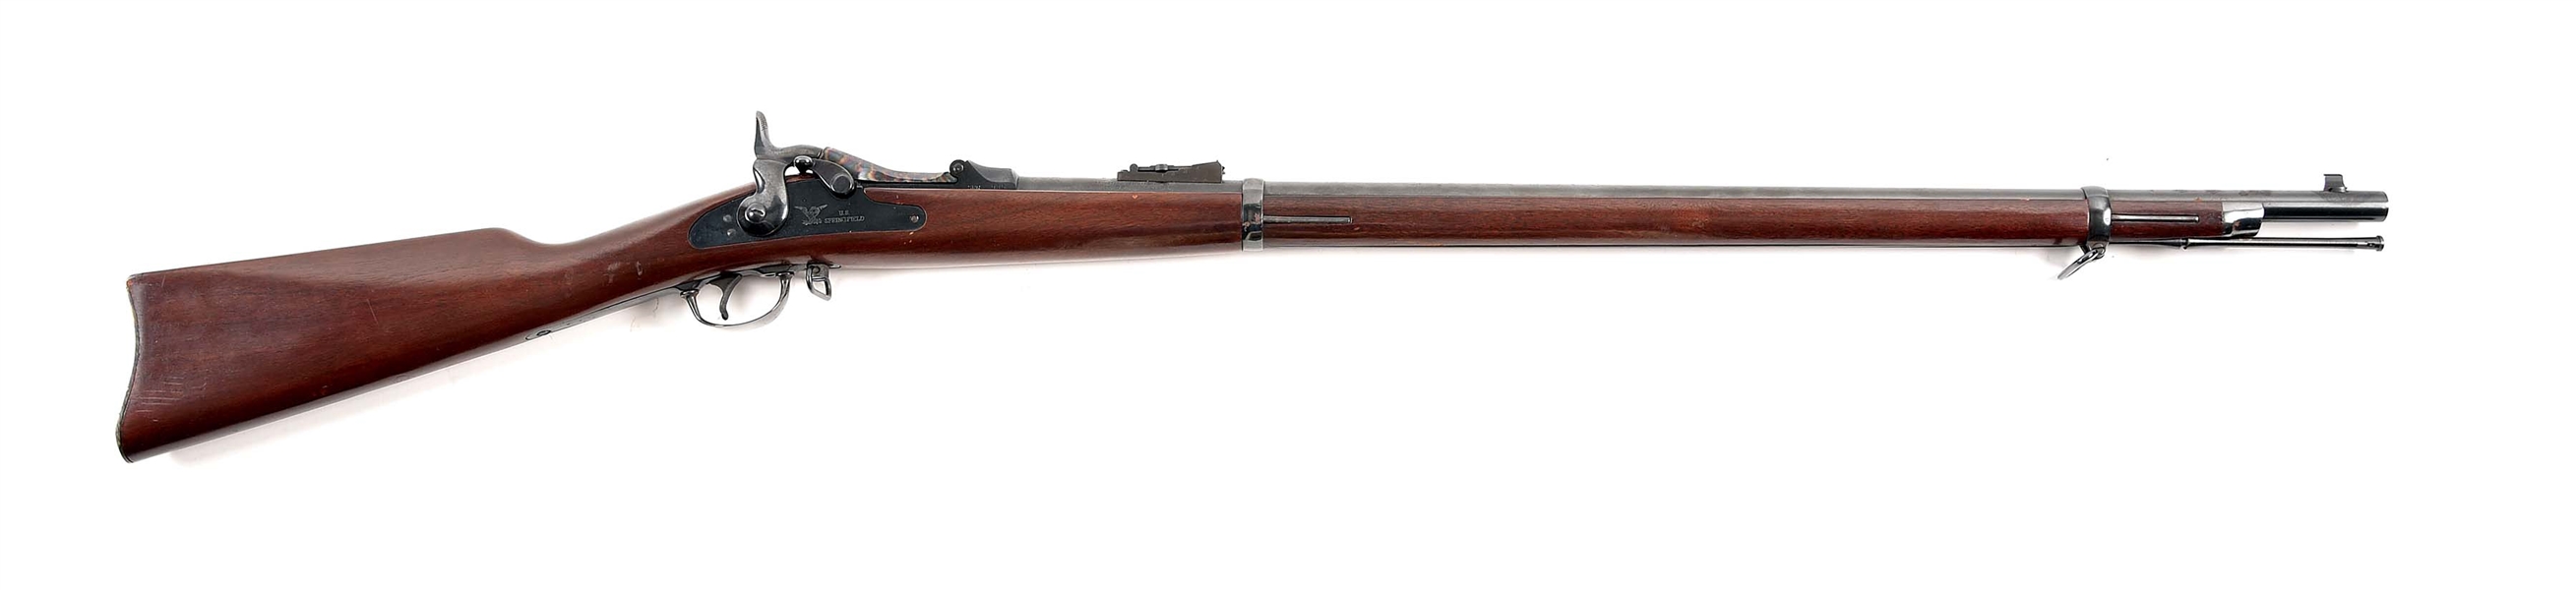 (C) H&R SPRINGFIELD 1873 TRAPDOOR .45-70 GOVERNMENT SINGLE SHOT RIFLE.